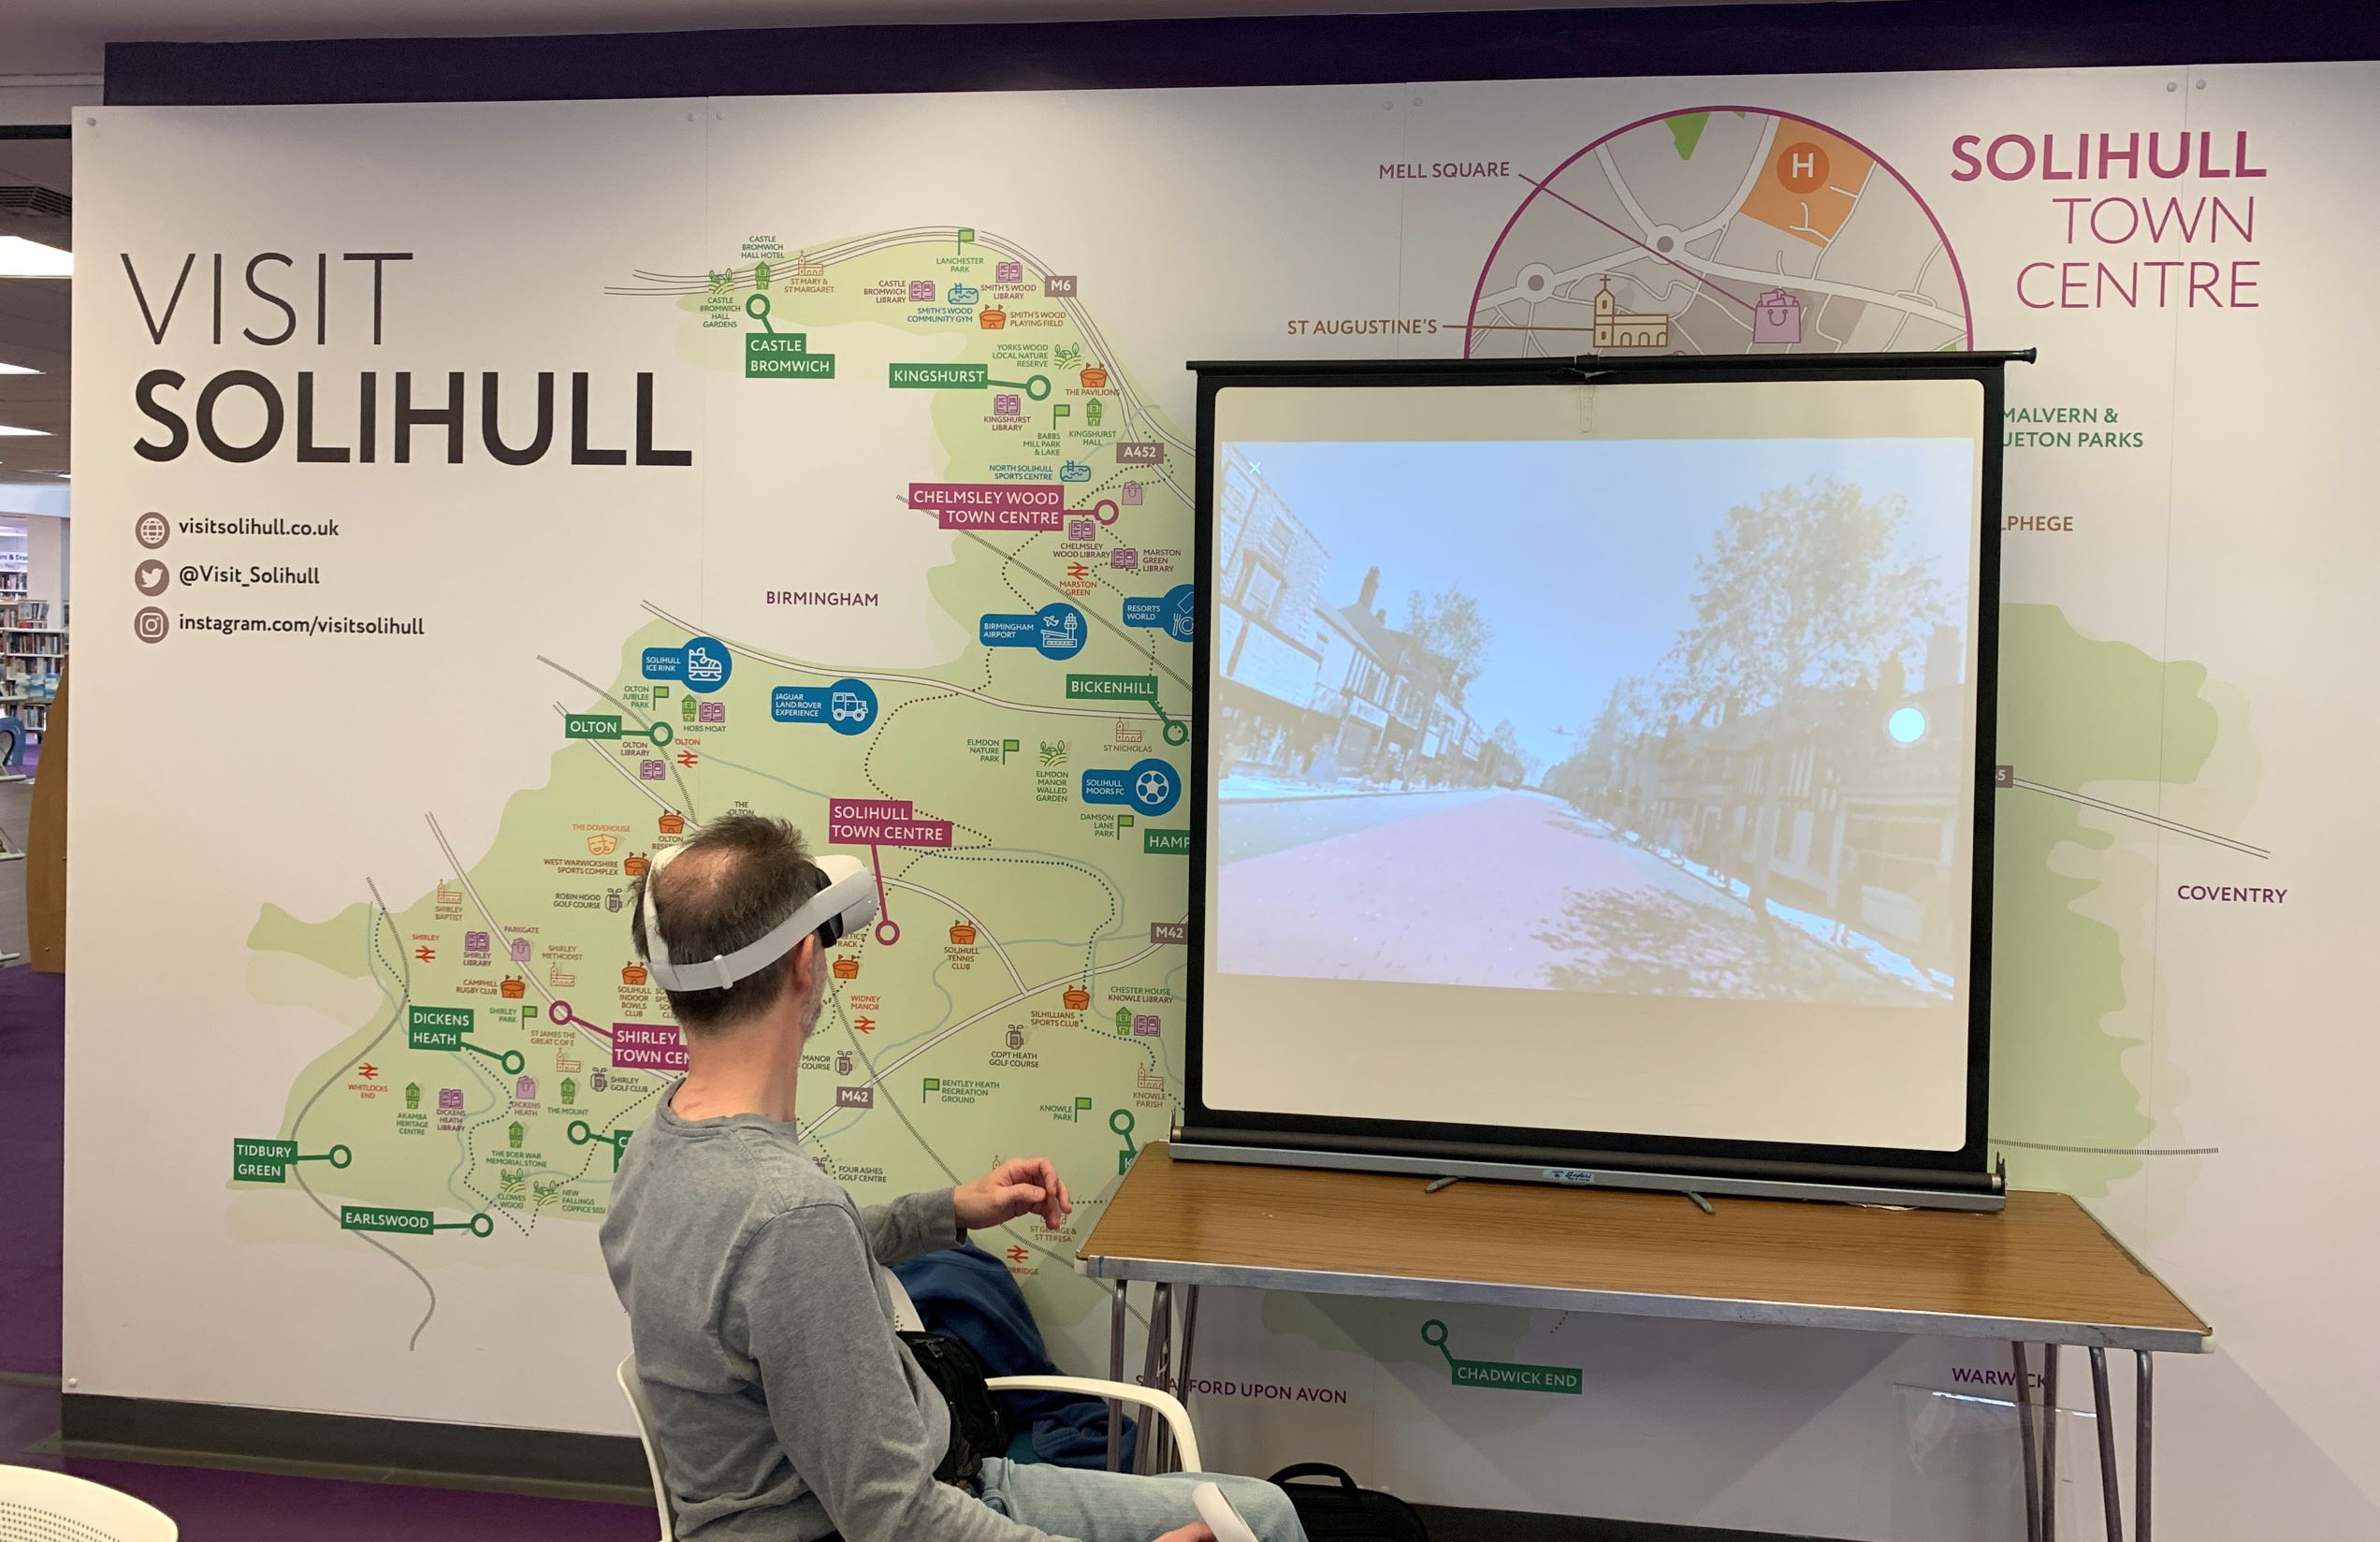 A man using a virtual reality headset with his view projected on a screen in front of a map of Solihull